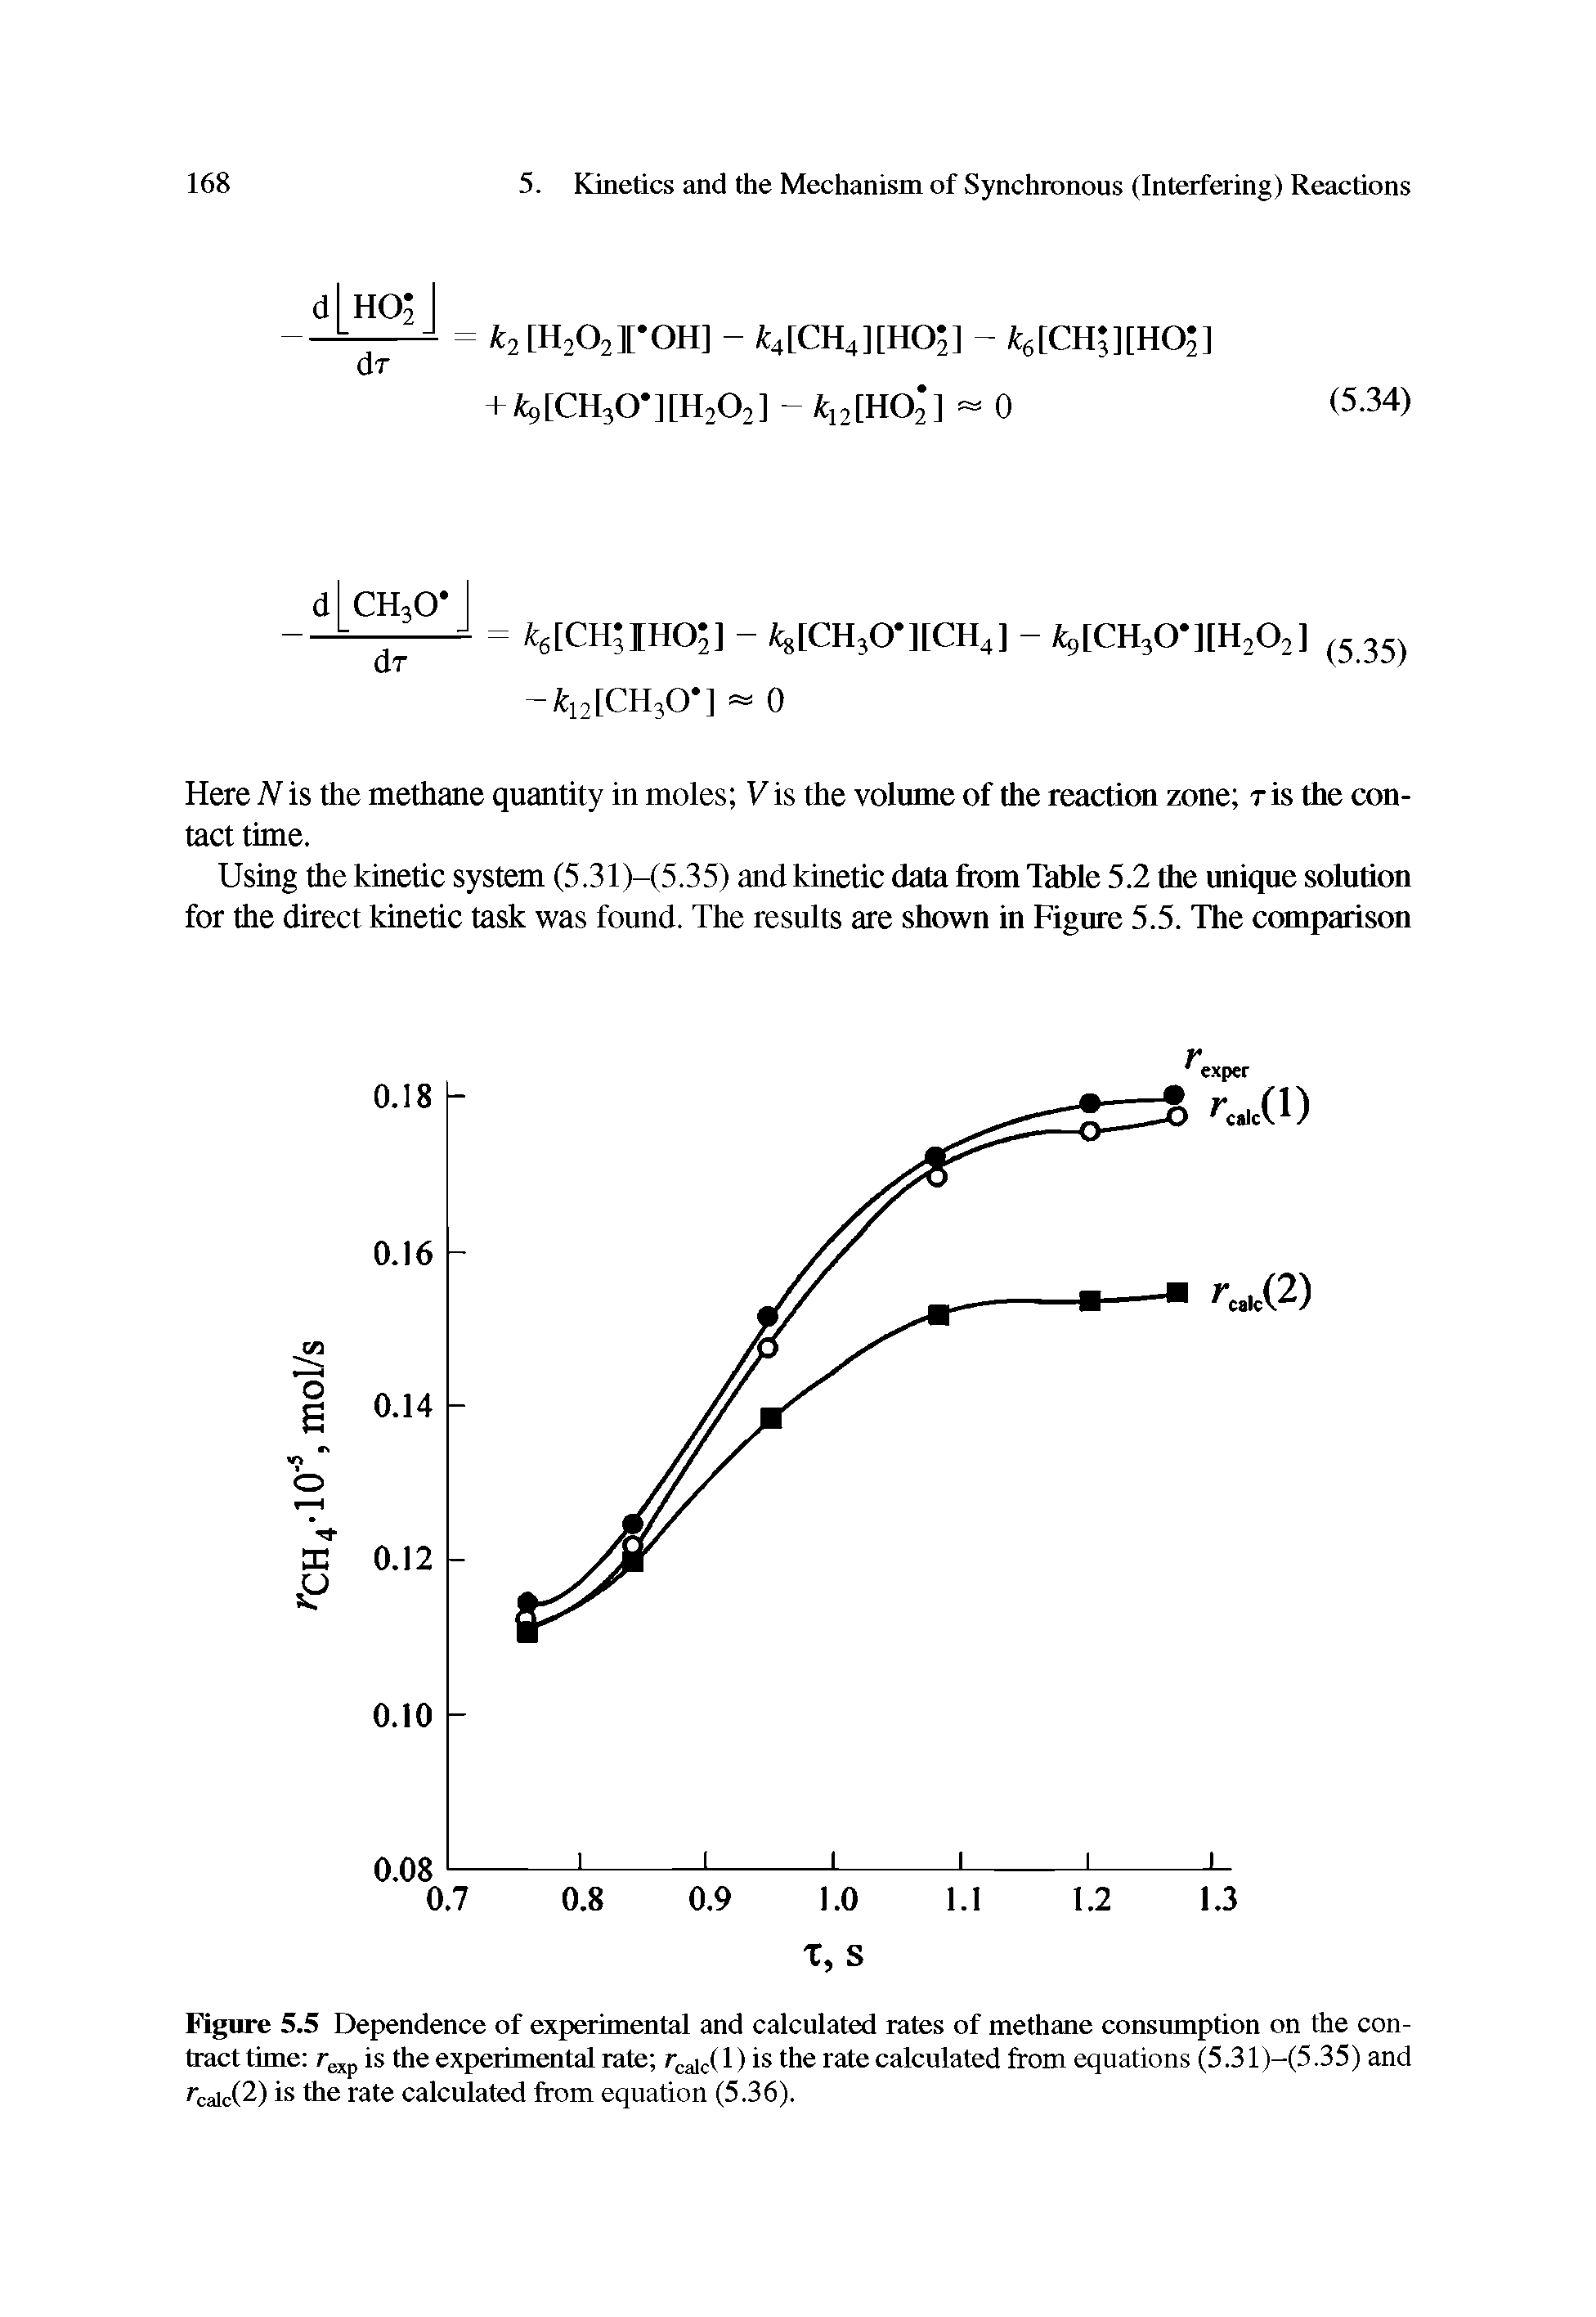 Figure 5.5 Dependence of experimental and calculated rates of methane consumption on the contract time rexp is the experimental rate rca c(l) is the rate calculated from equations (5.31)—(5.35) and rcaic(2) is the rate calculated from equation (5.36).